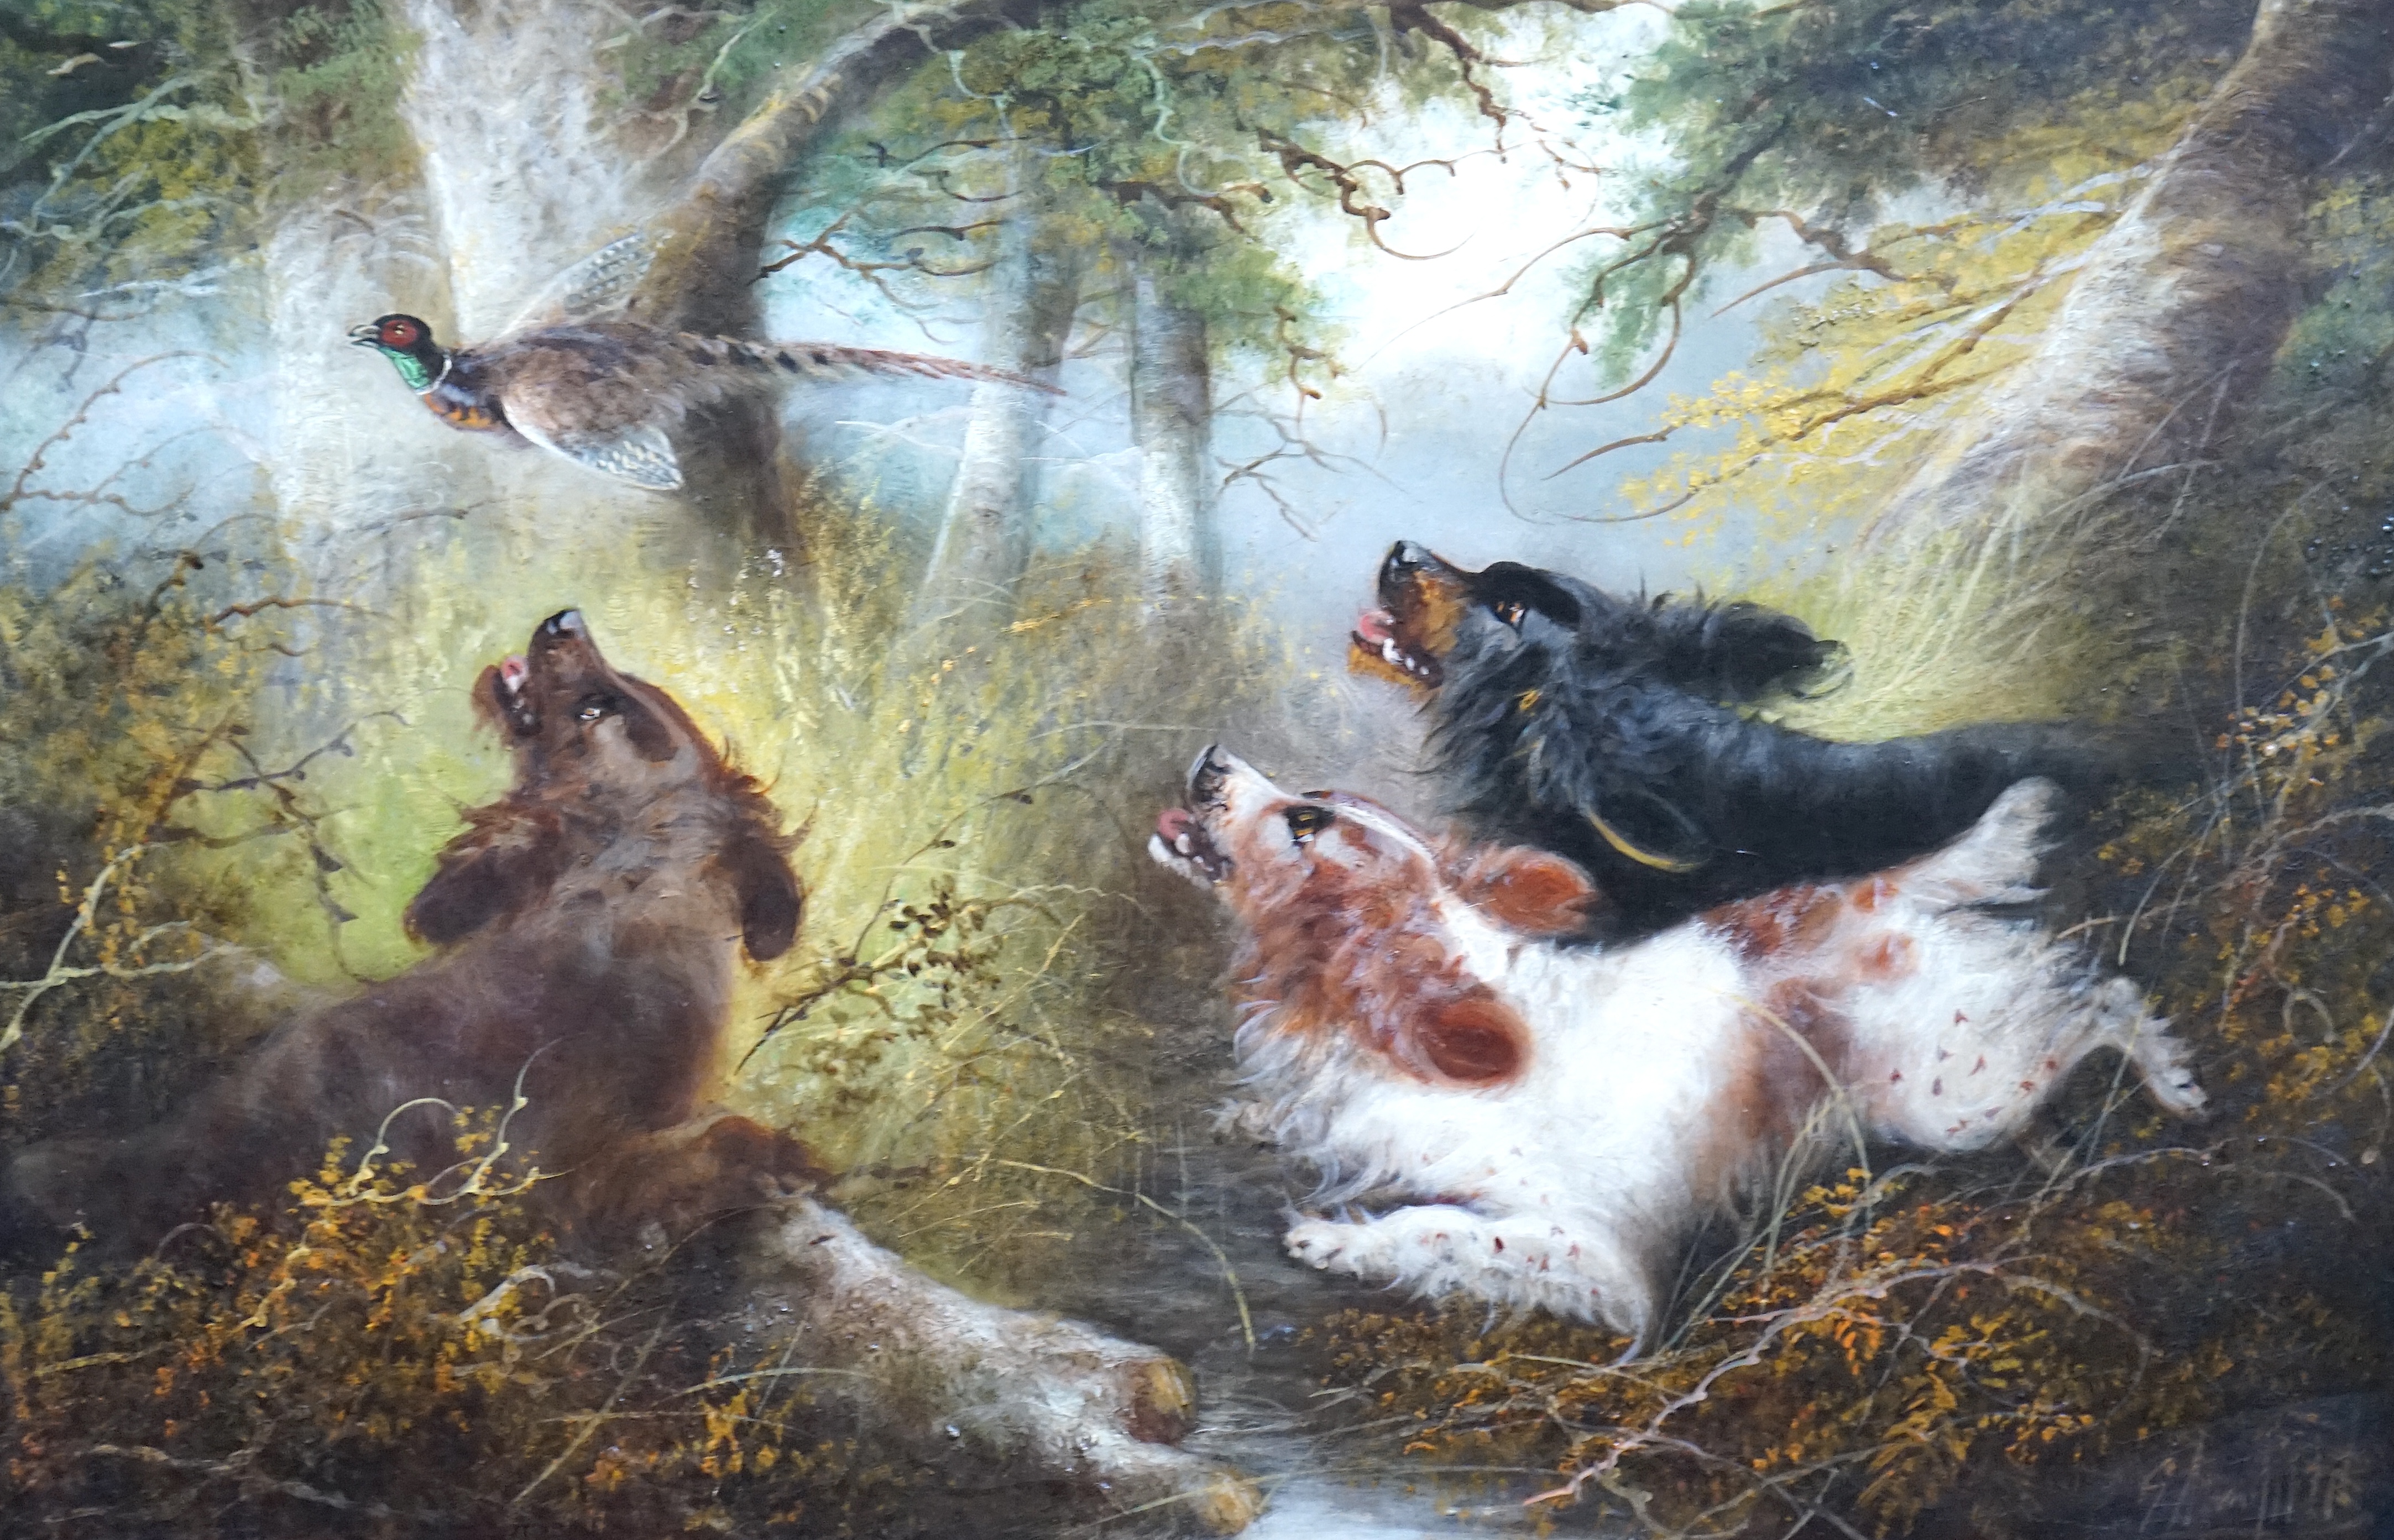 George Armfield (British, 1810-1893), Spaniels and game in a woodland, oil on canvas, 50 x 75cm